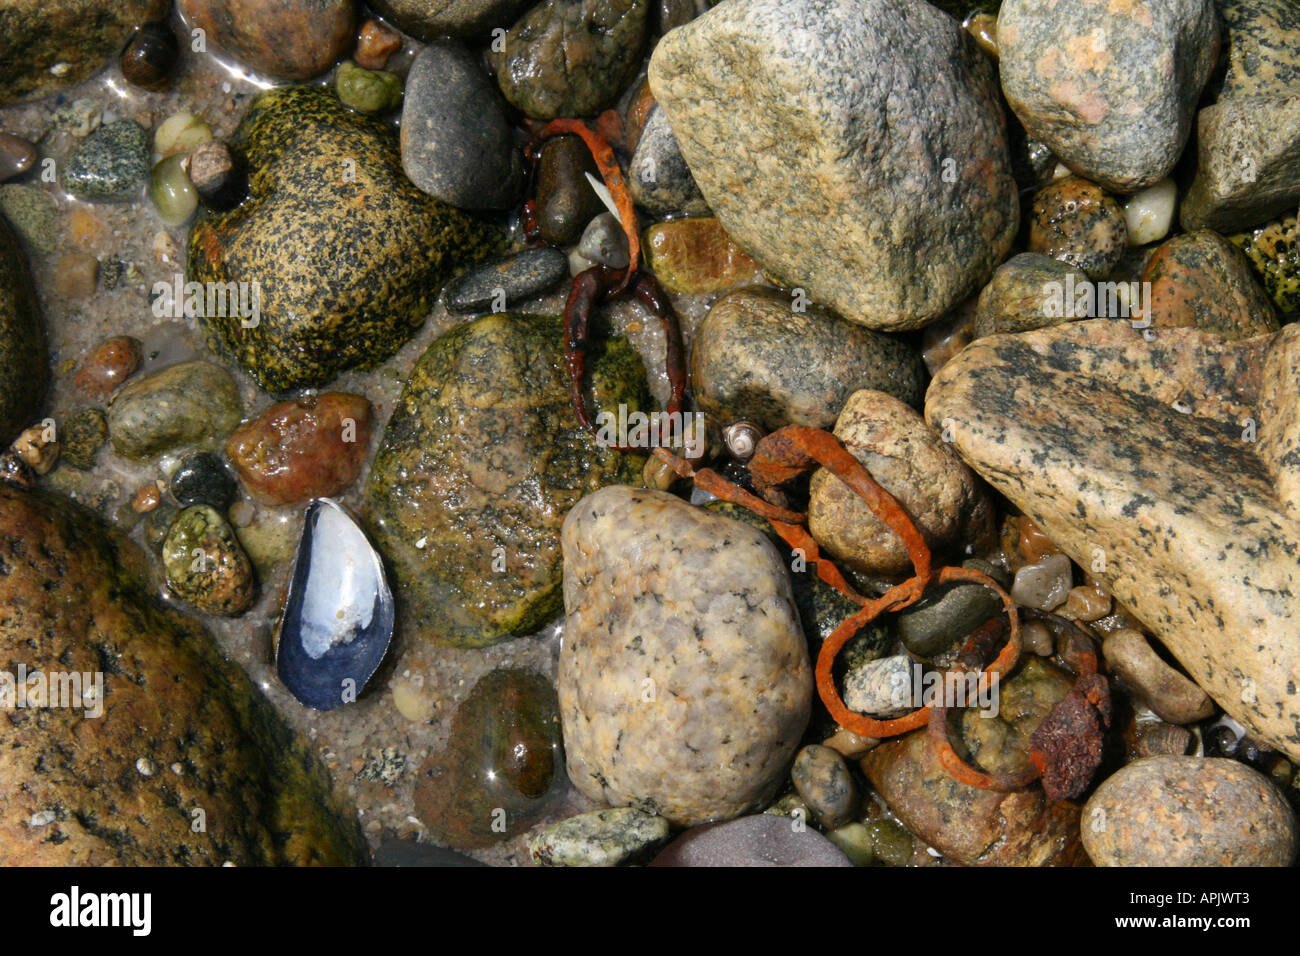 Rusty old chain on rocks at low tide. Stock Photo